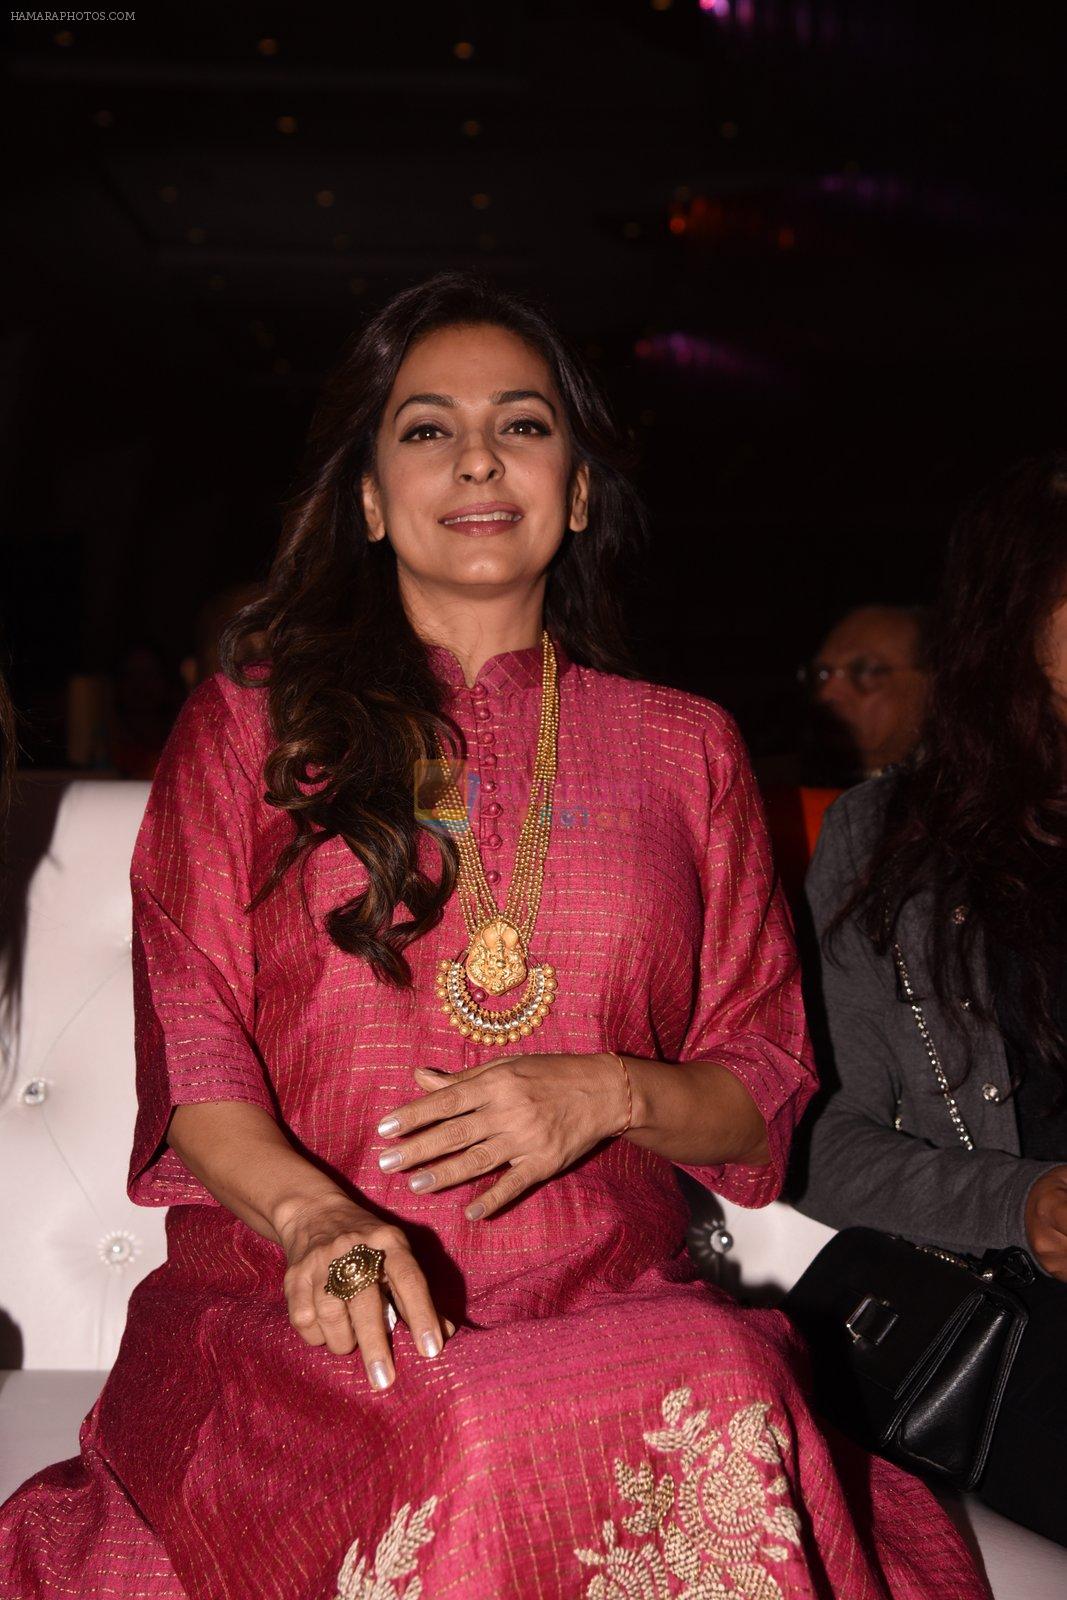 Juhi Chawla at Discon as she speaks about evils of plastic and pollution on 7th Jan 2016